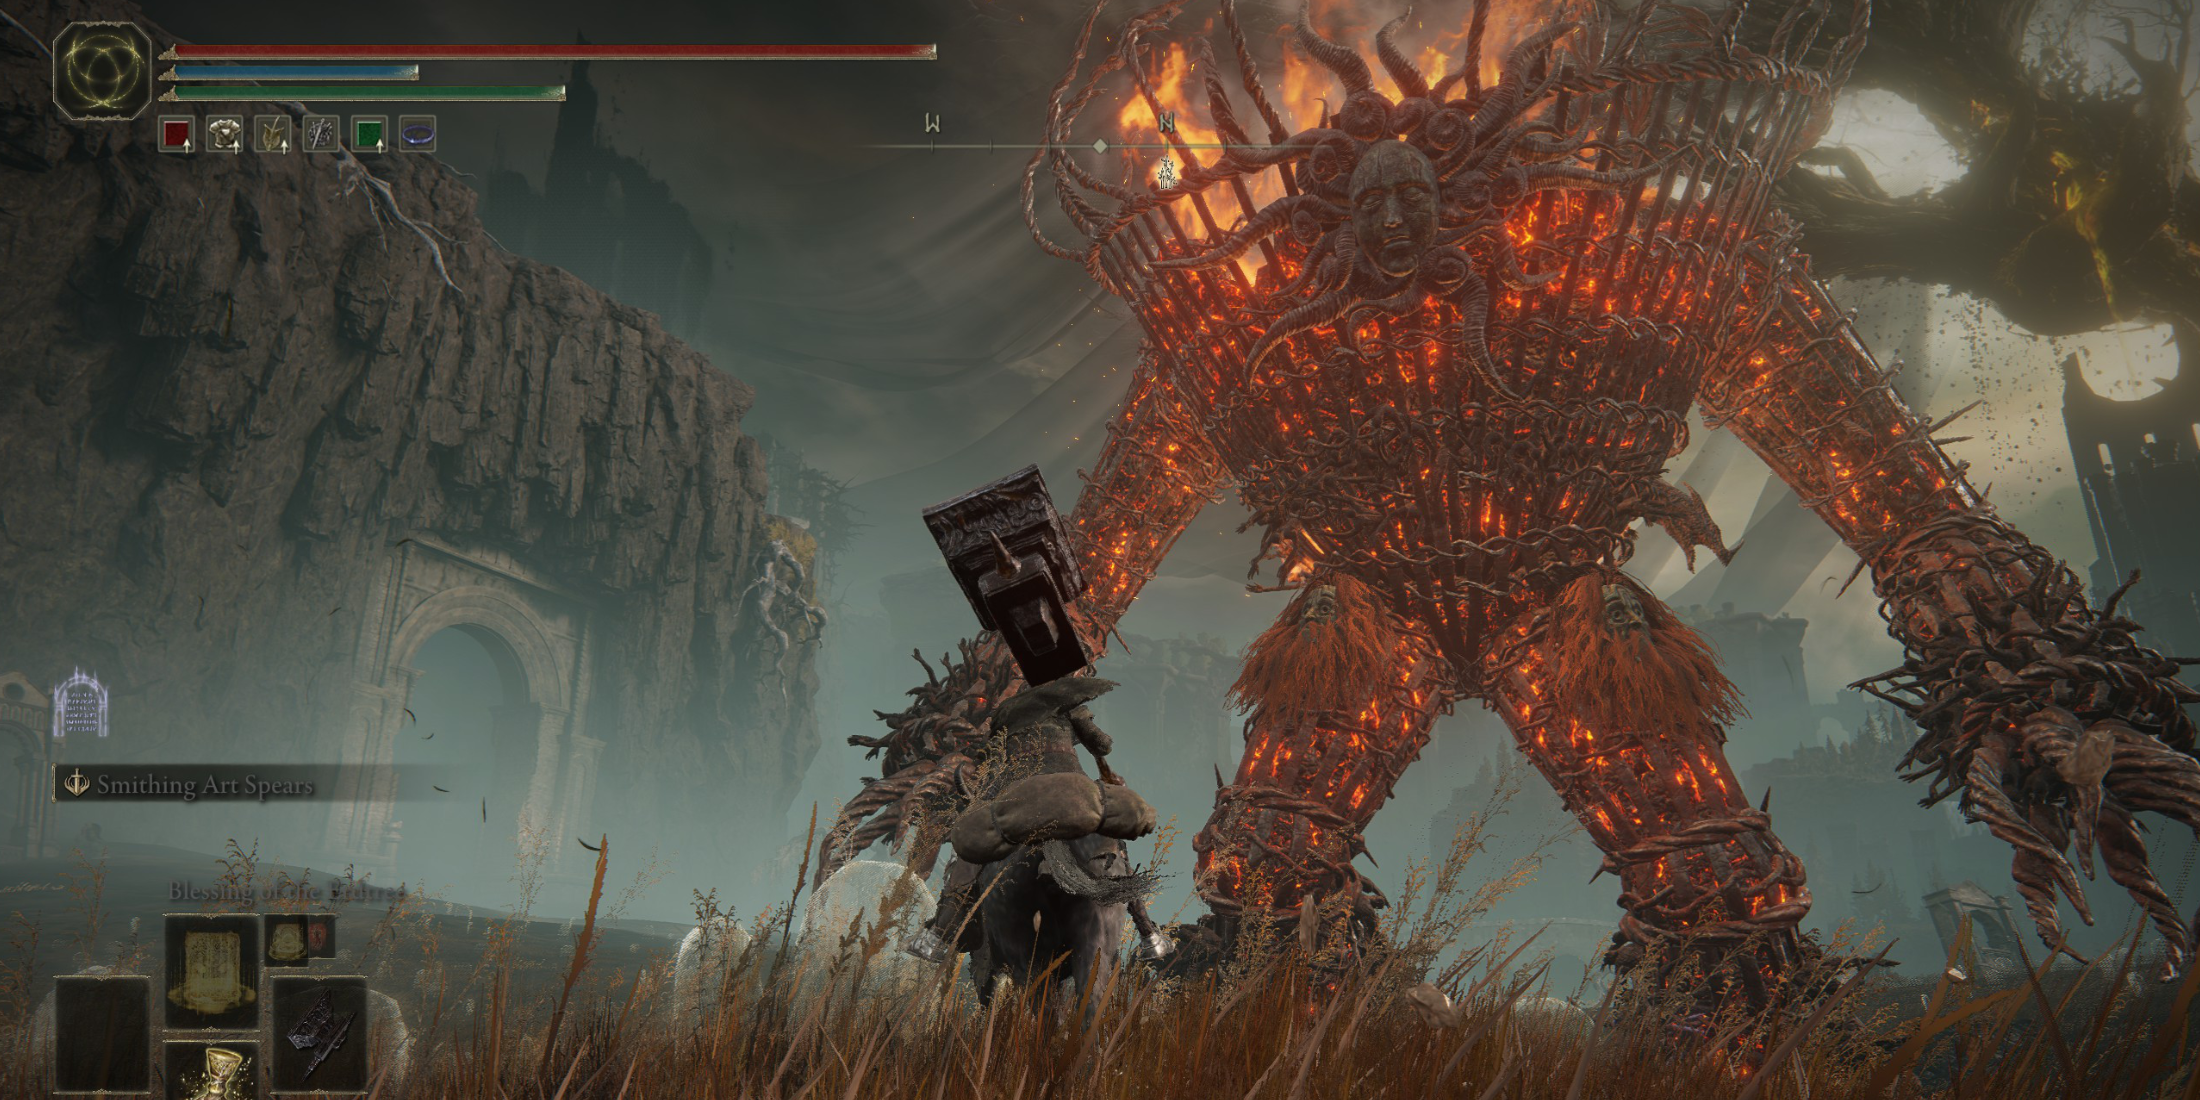 The Furnace Golem in Elden Ring Shadow of the Erdtree